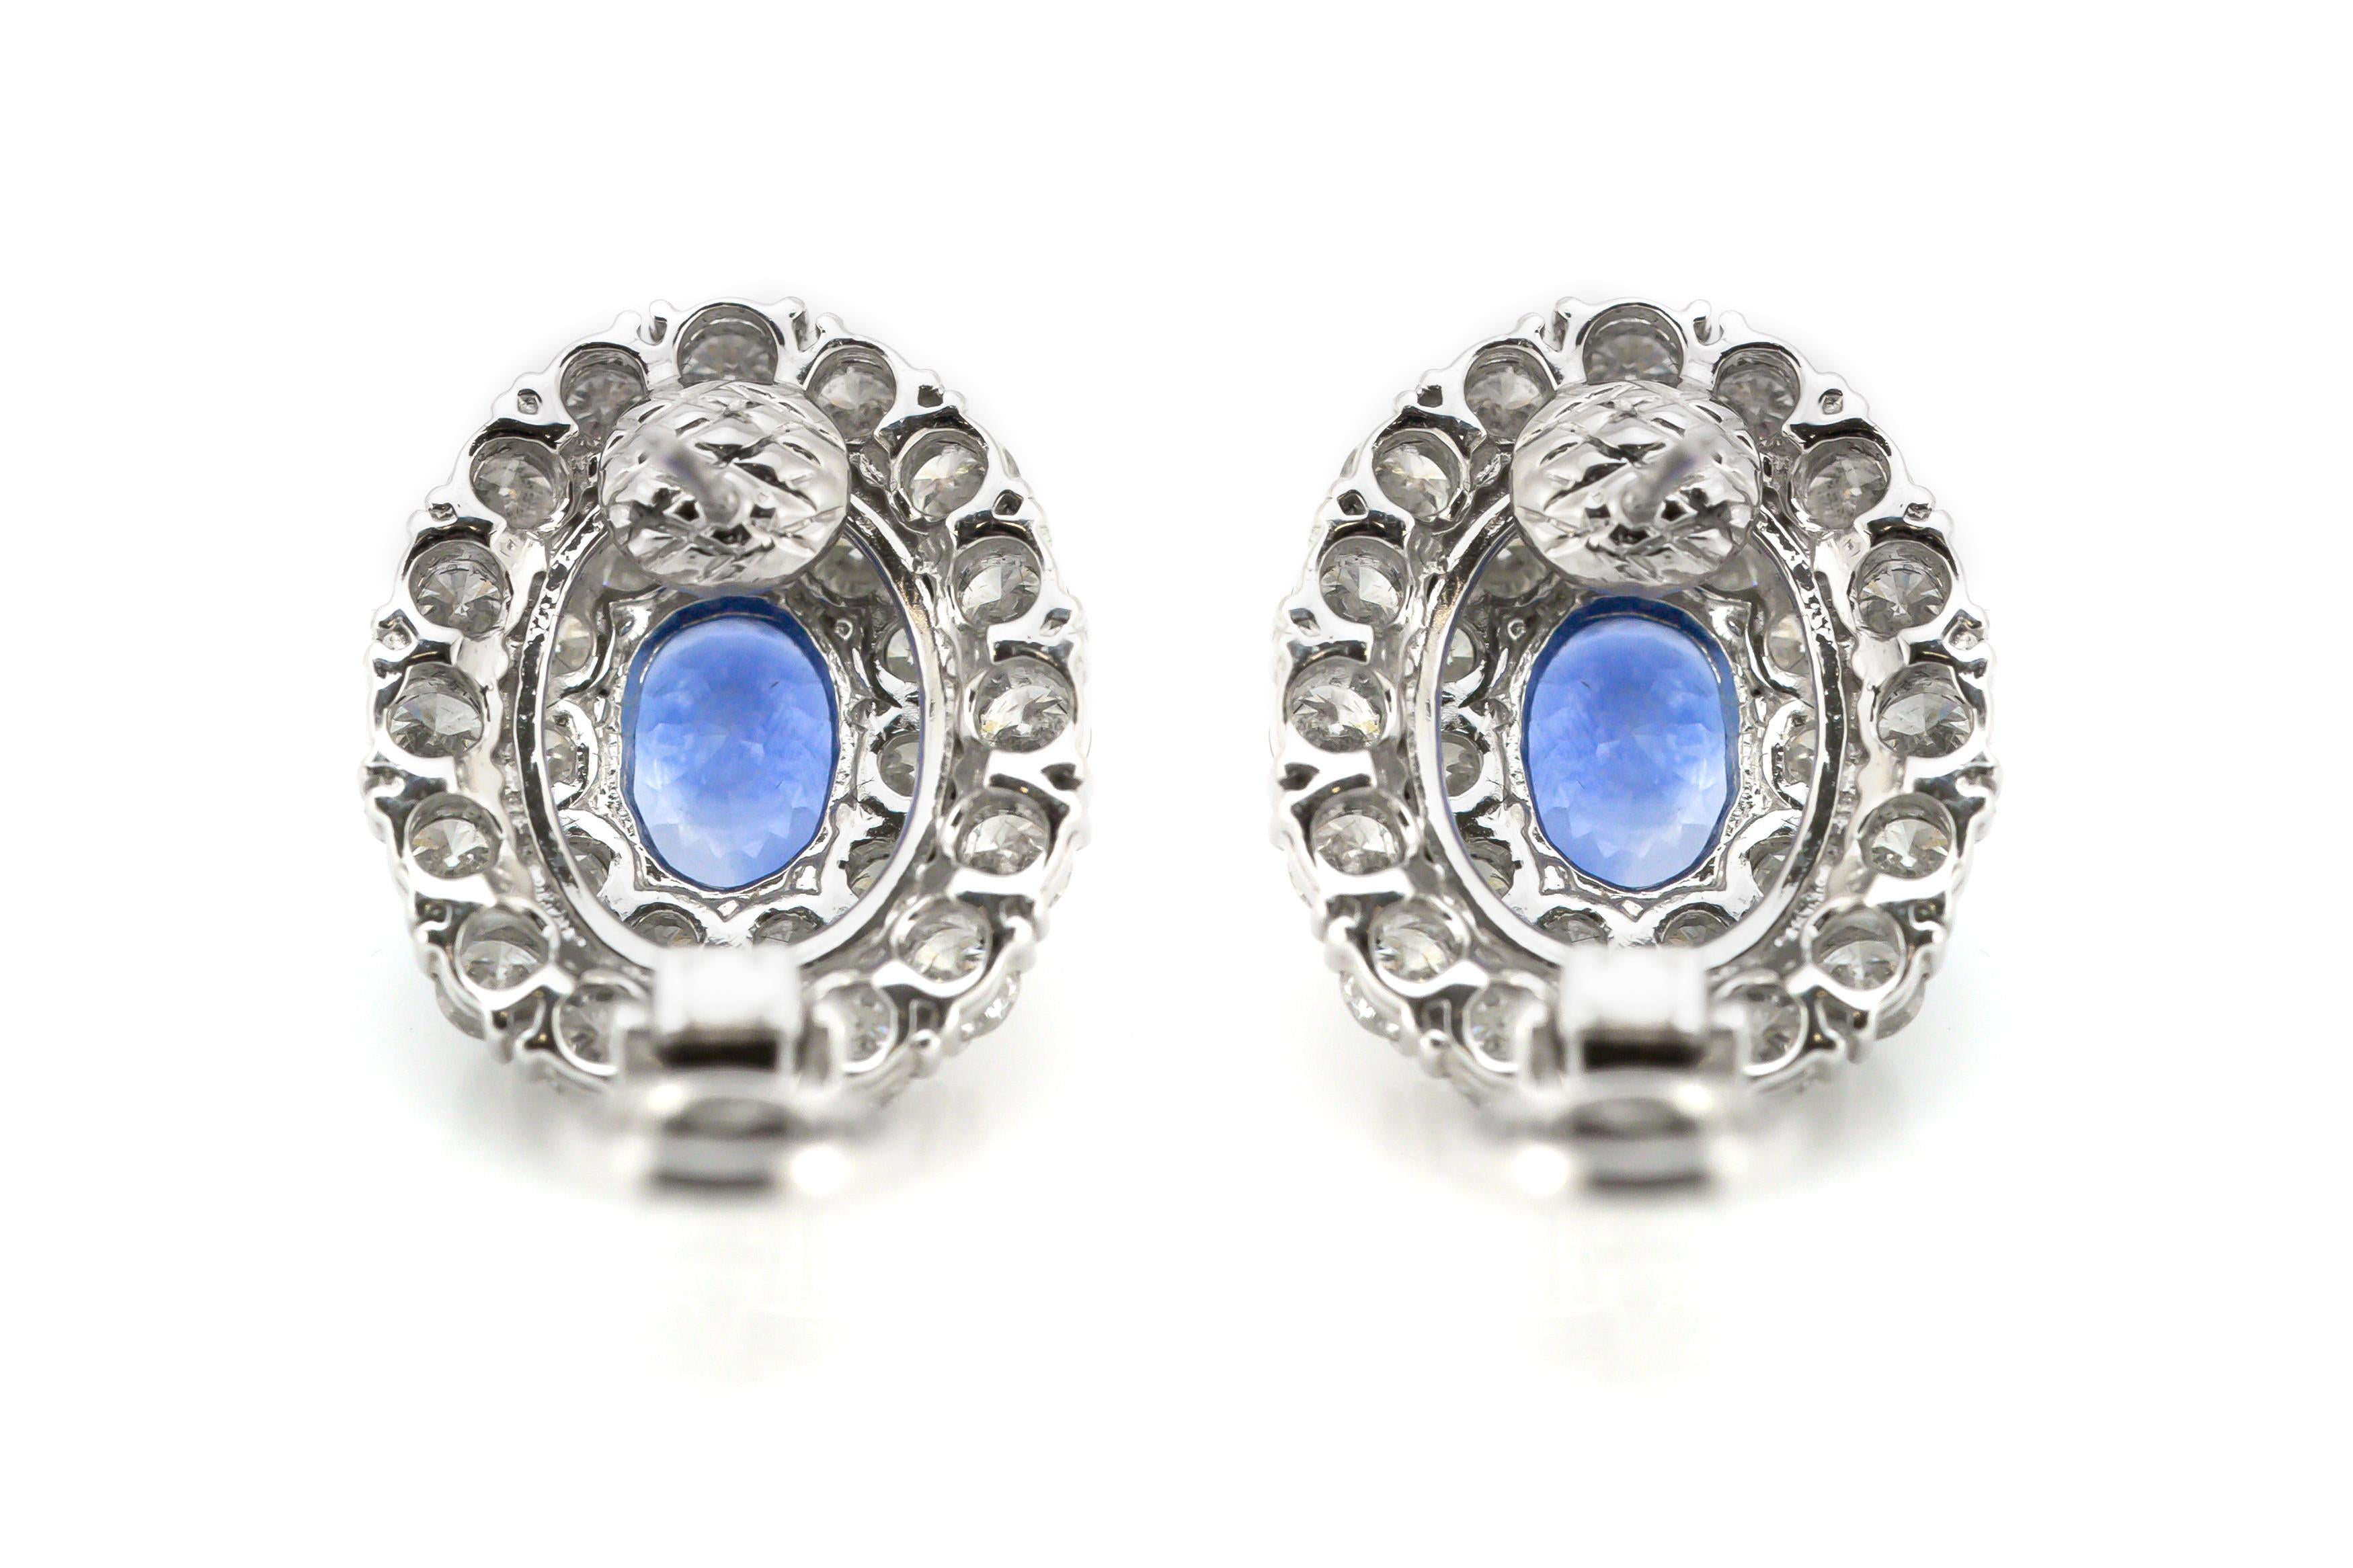 Beautiful clip on earrings finely crafted in platinum.
The diamond weighs an approximate total of 5.27 carat.
The sapphire weighs an approximate total of 5.68 carat.
